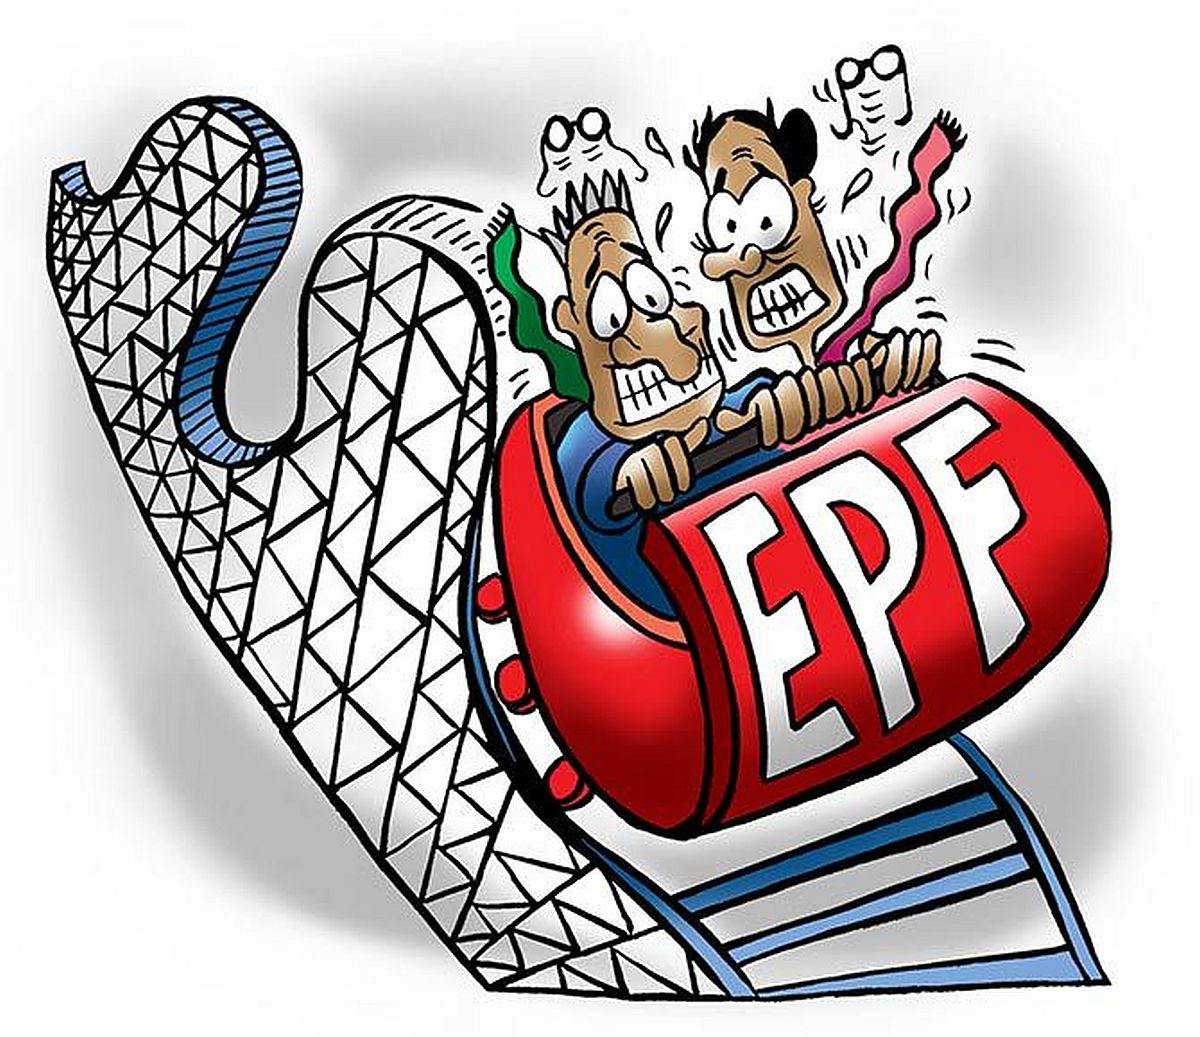 EPF interest rate fixed at 8.15% for FY 2022-23